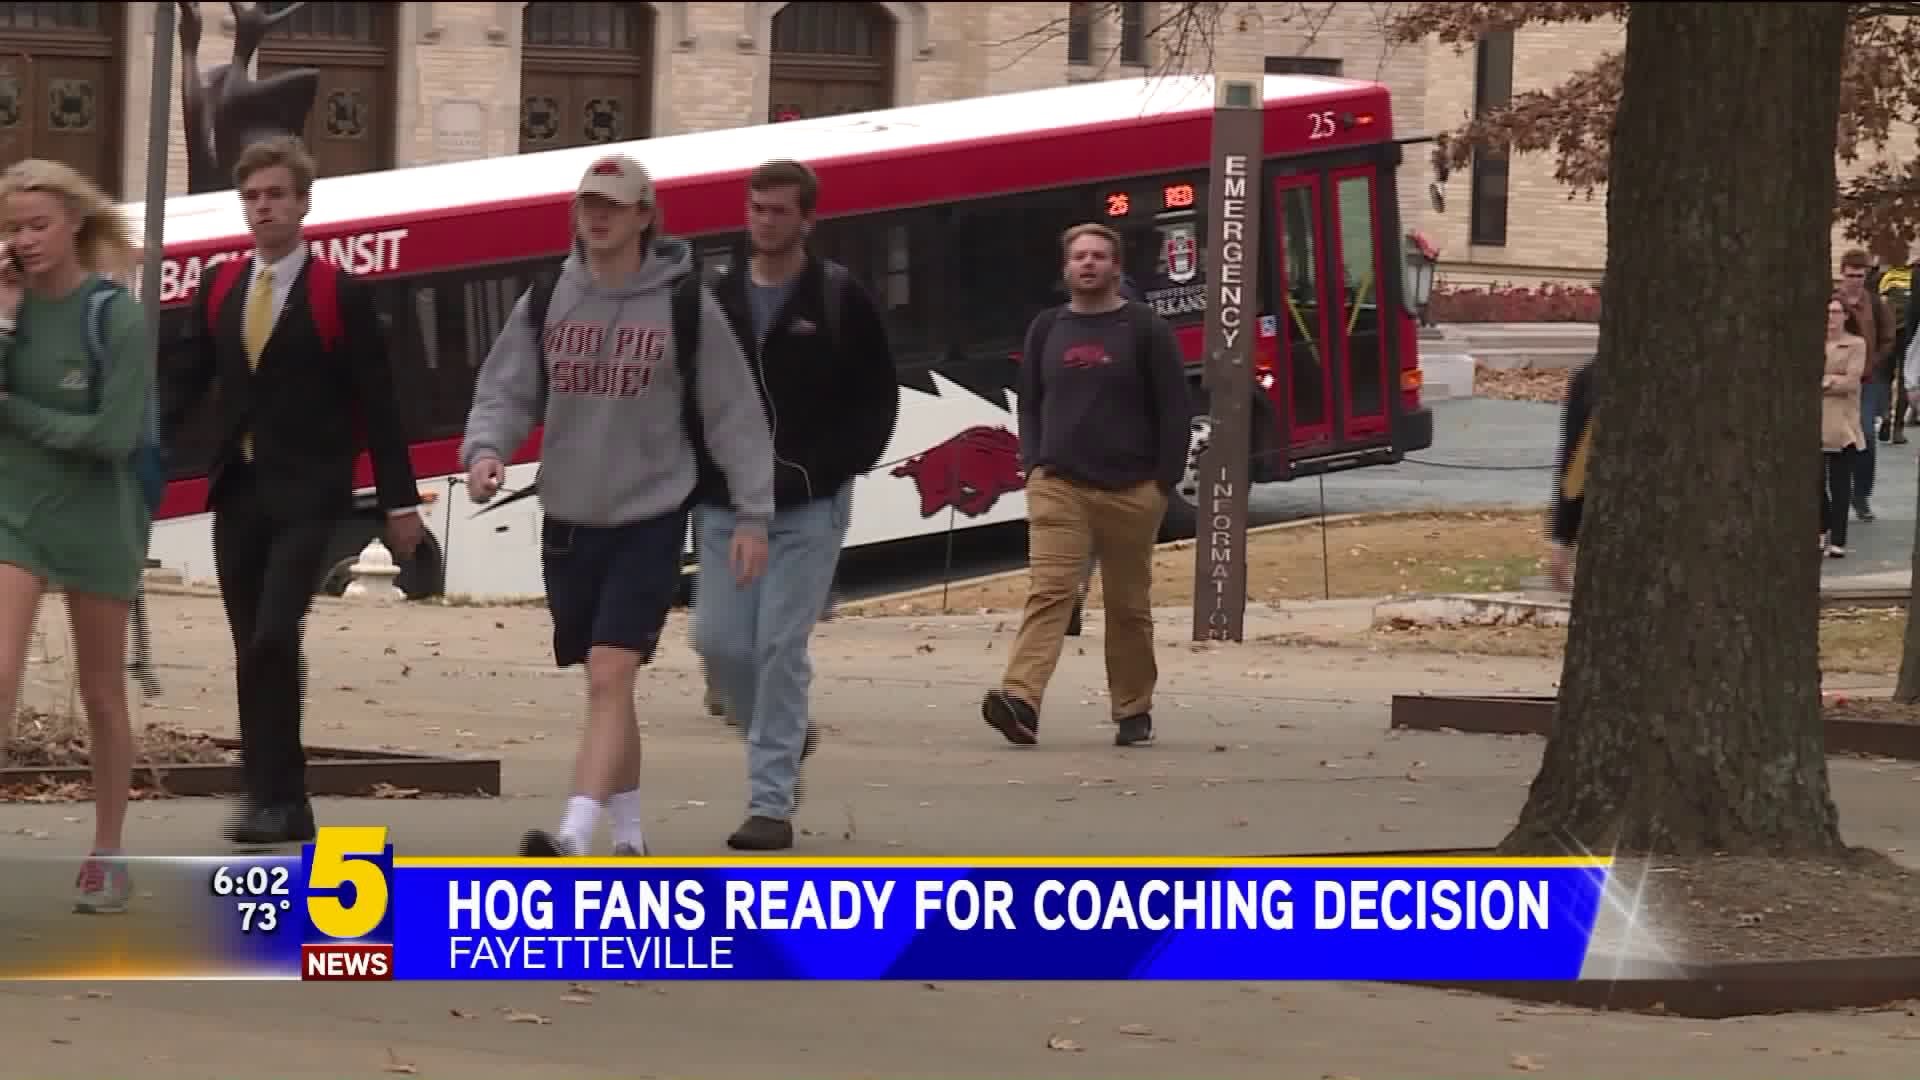 Hog Fans Ready For Coaching Decision